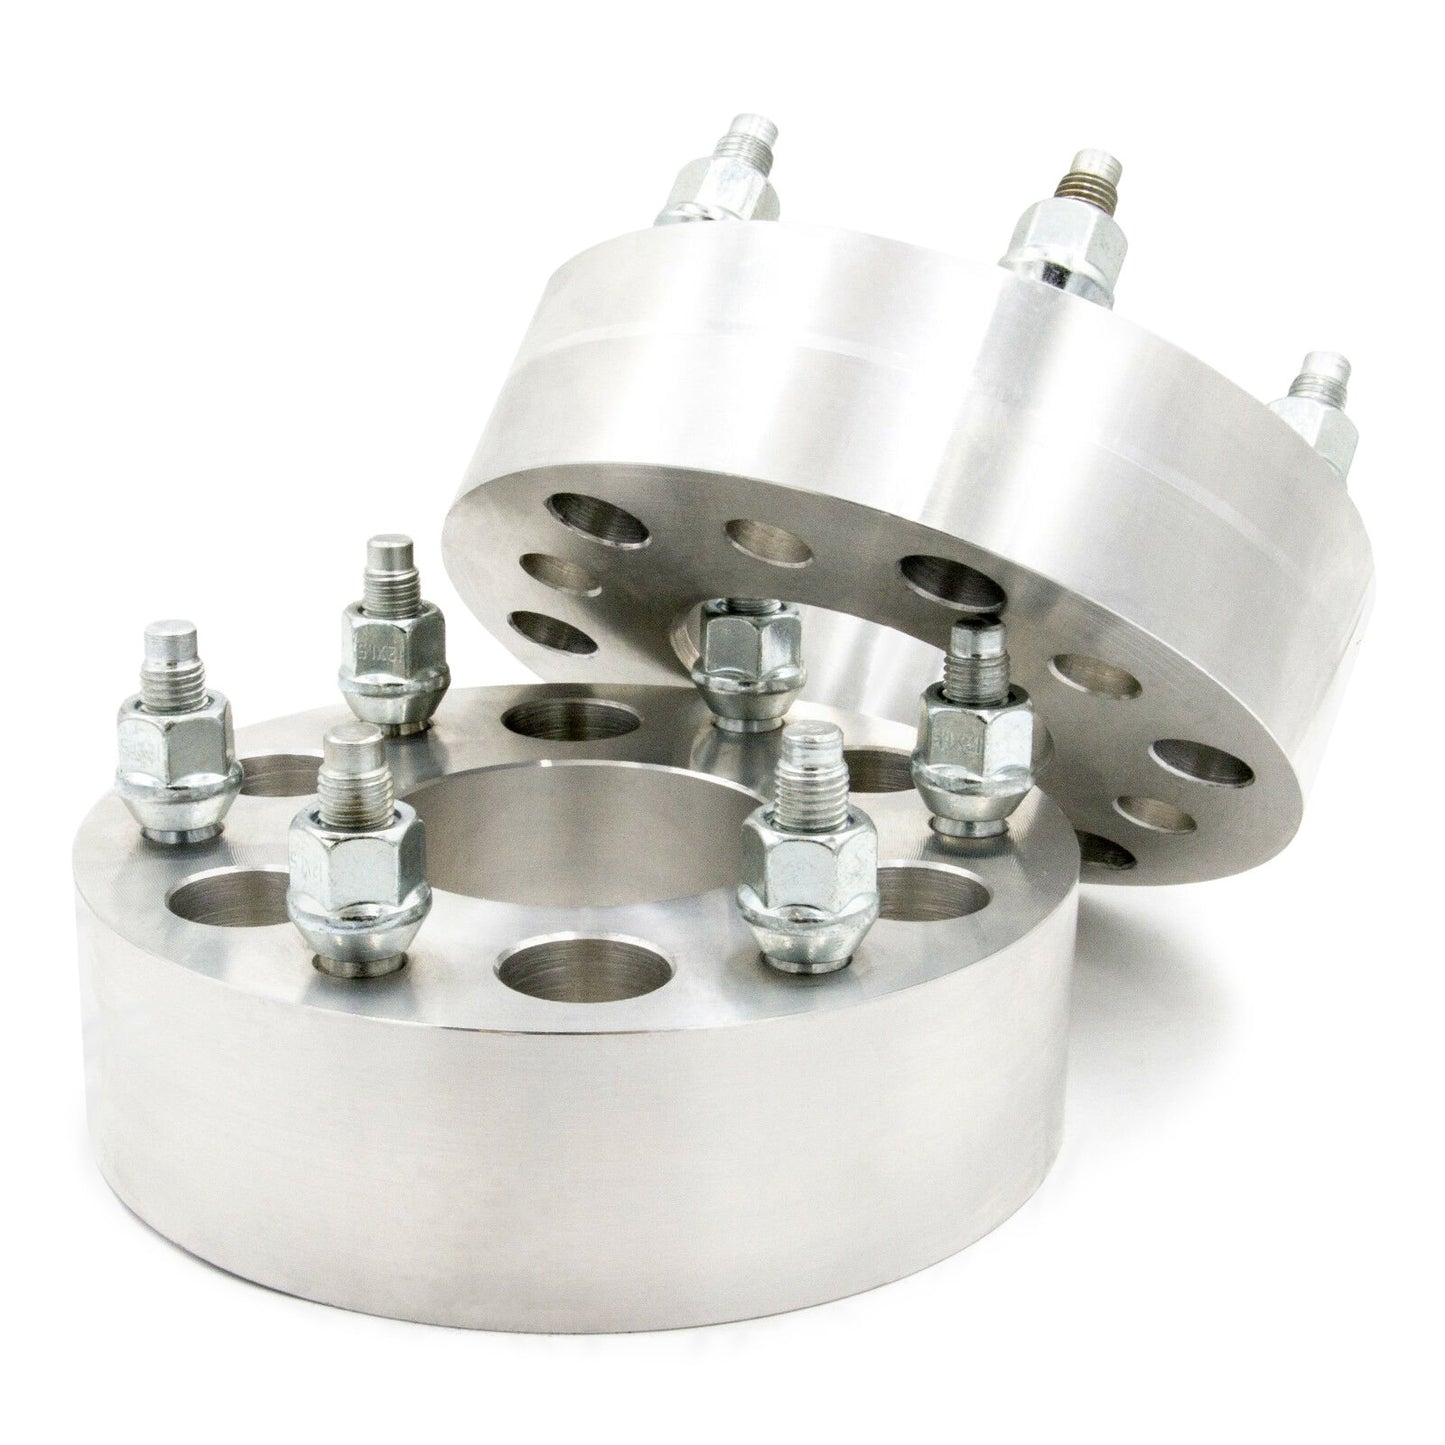 6x135 to 6x135 Wheel Spacer/Adapter - Thickness: 3/4"- 4"